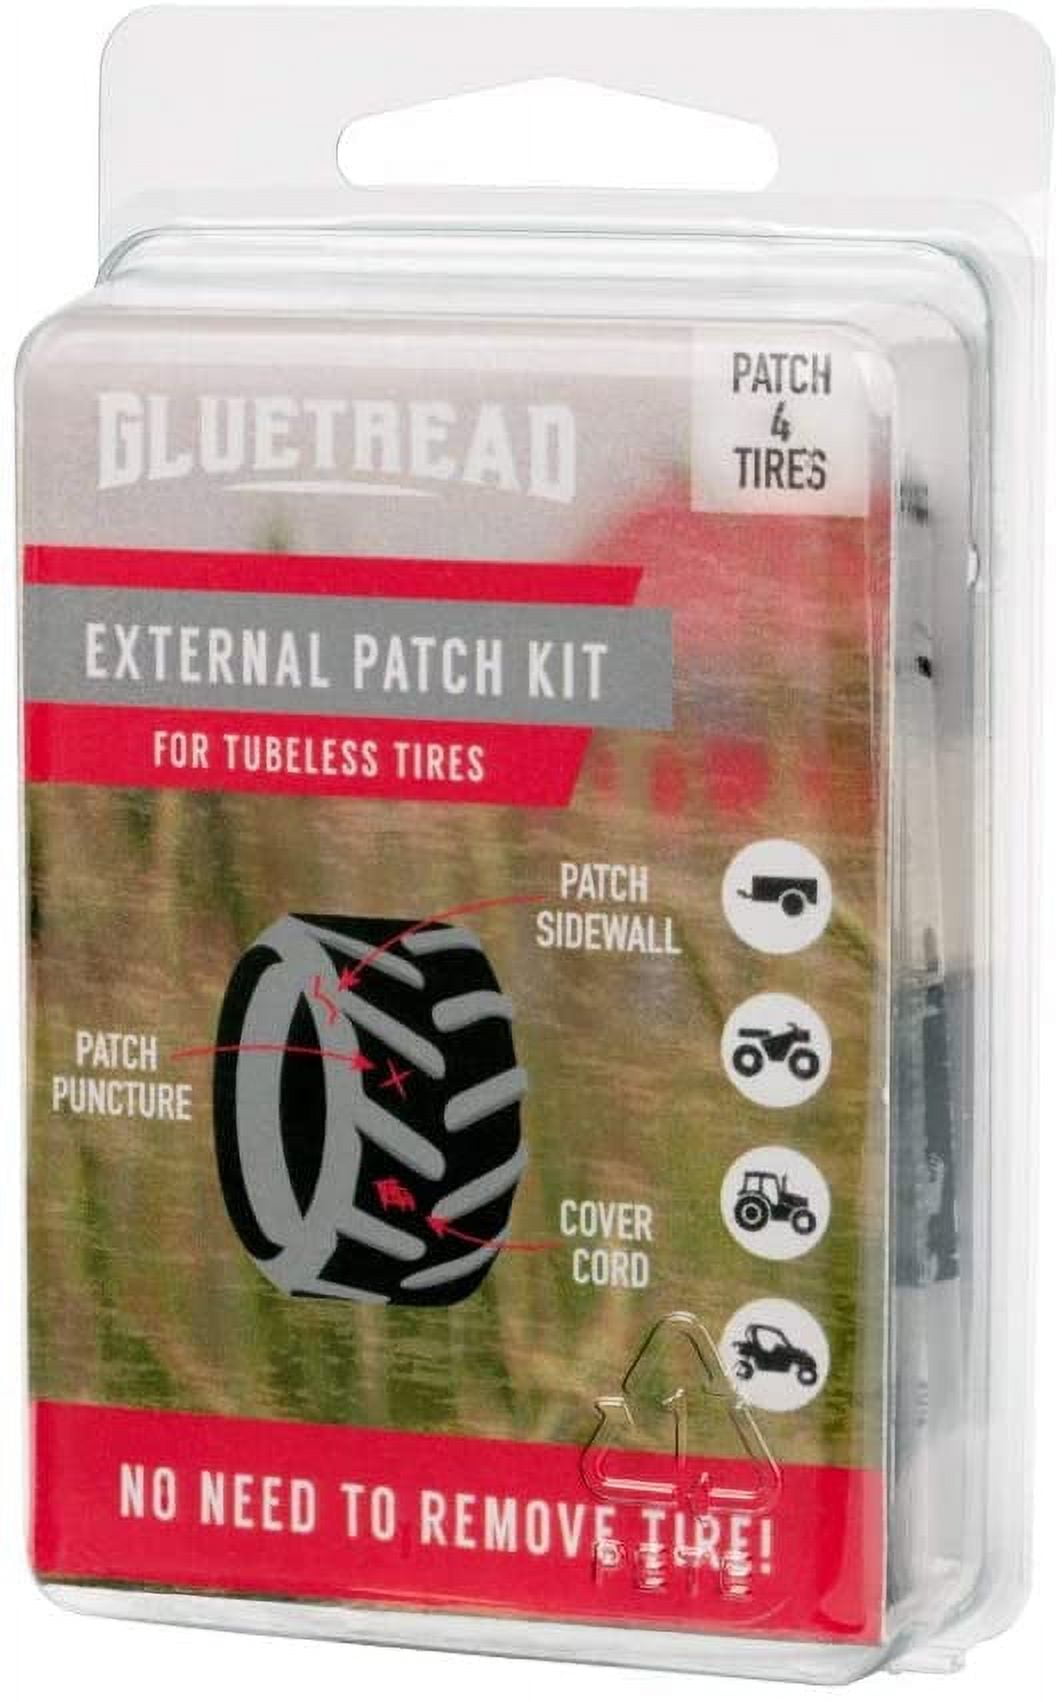 Monkey Grip Tire & Rubber Patch Kit For All Rubber Repairs 12 pack